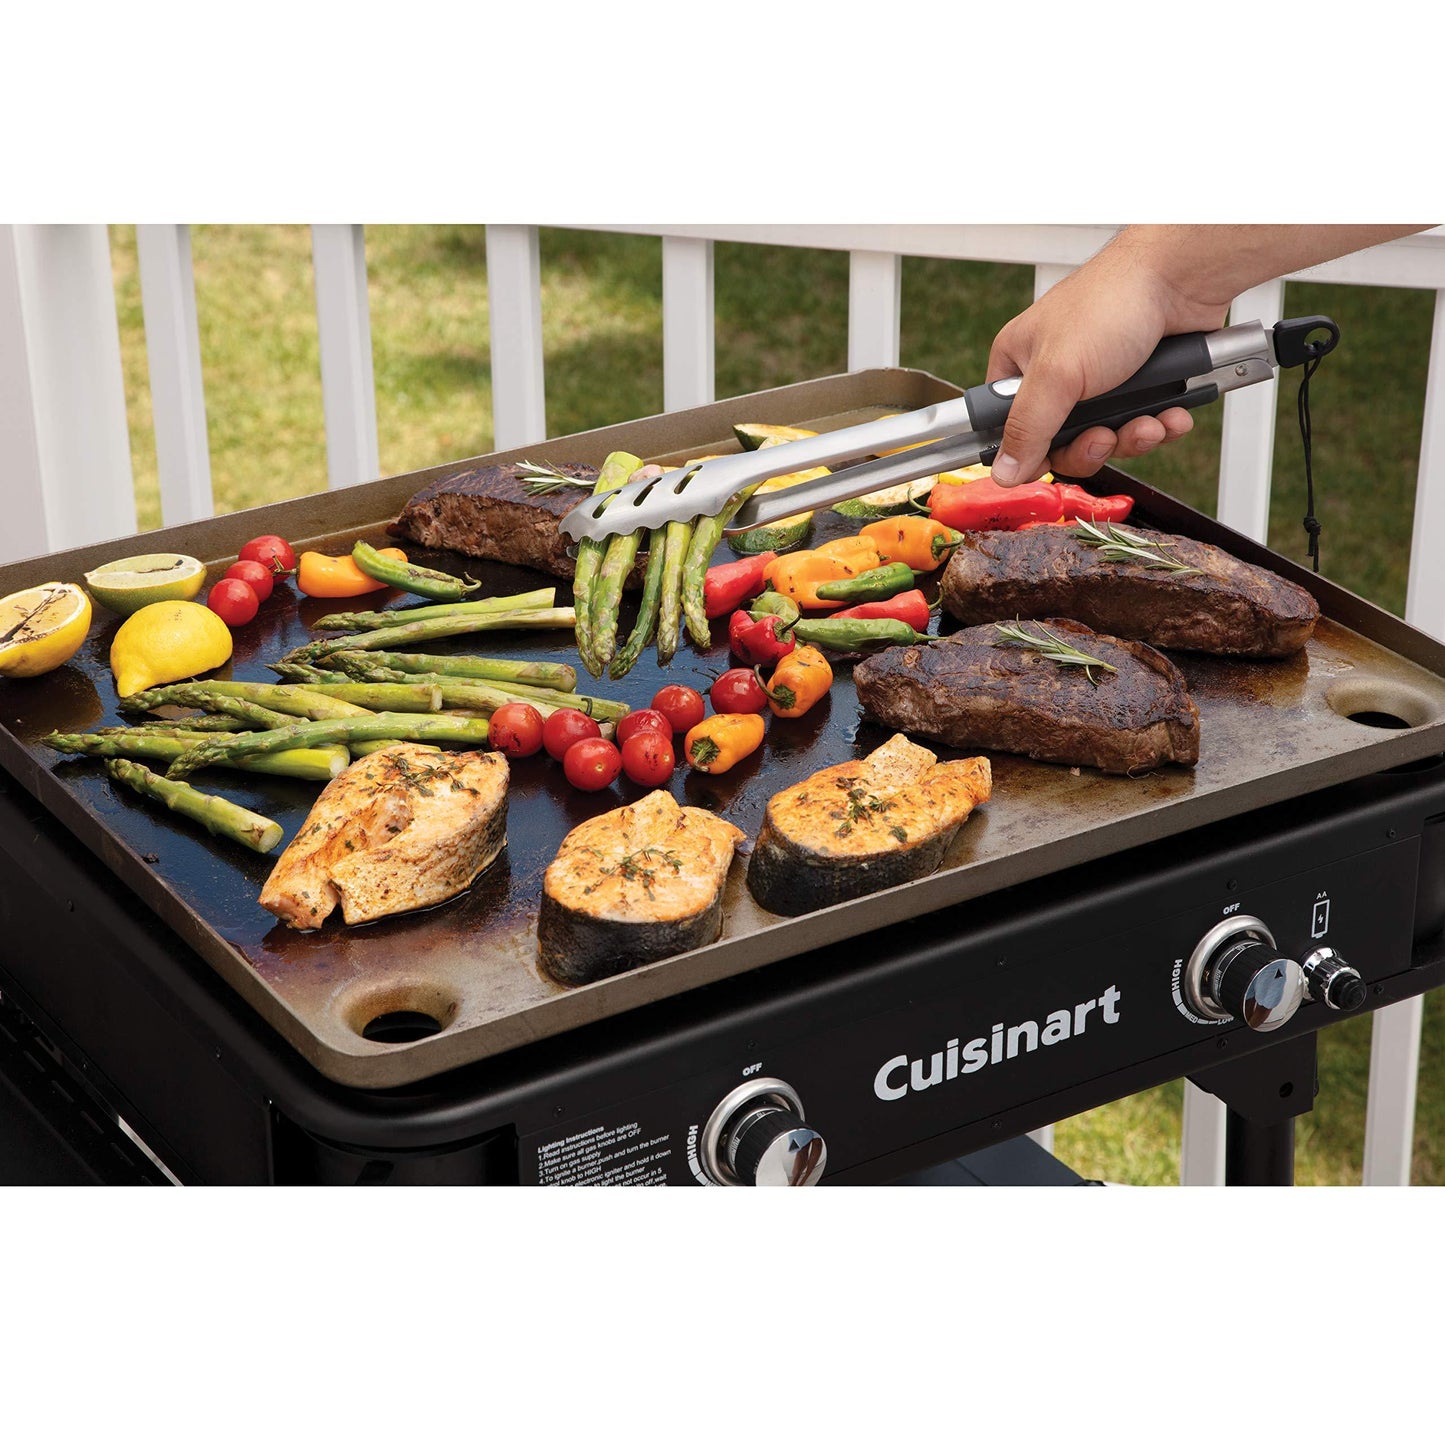 Cuisinart Flat Top Professional Quality Propane CGG-0028 28" Two Burner Gas Griddle - CookCave